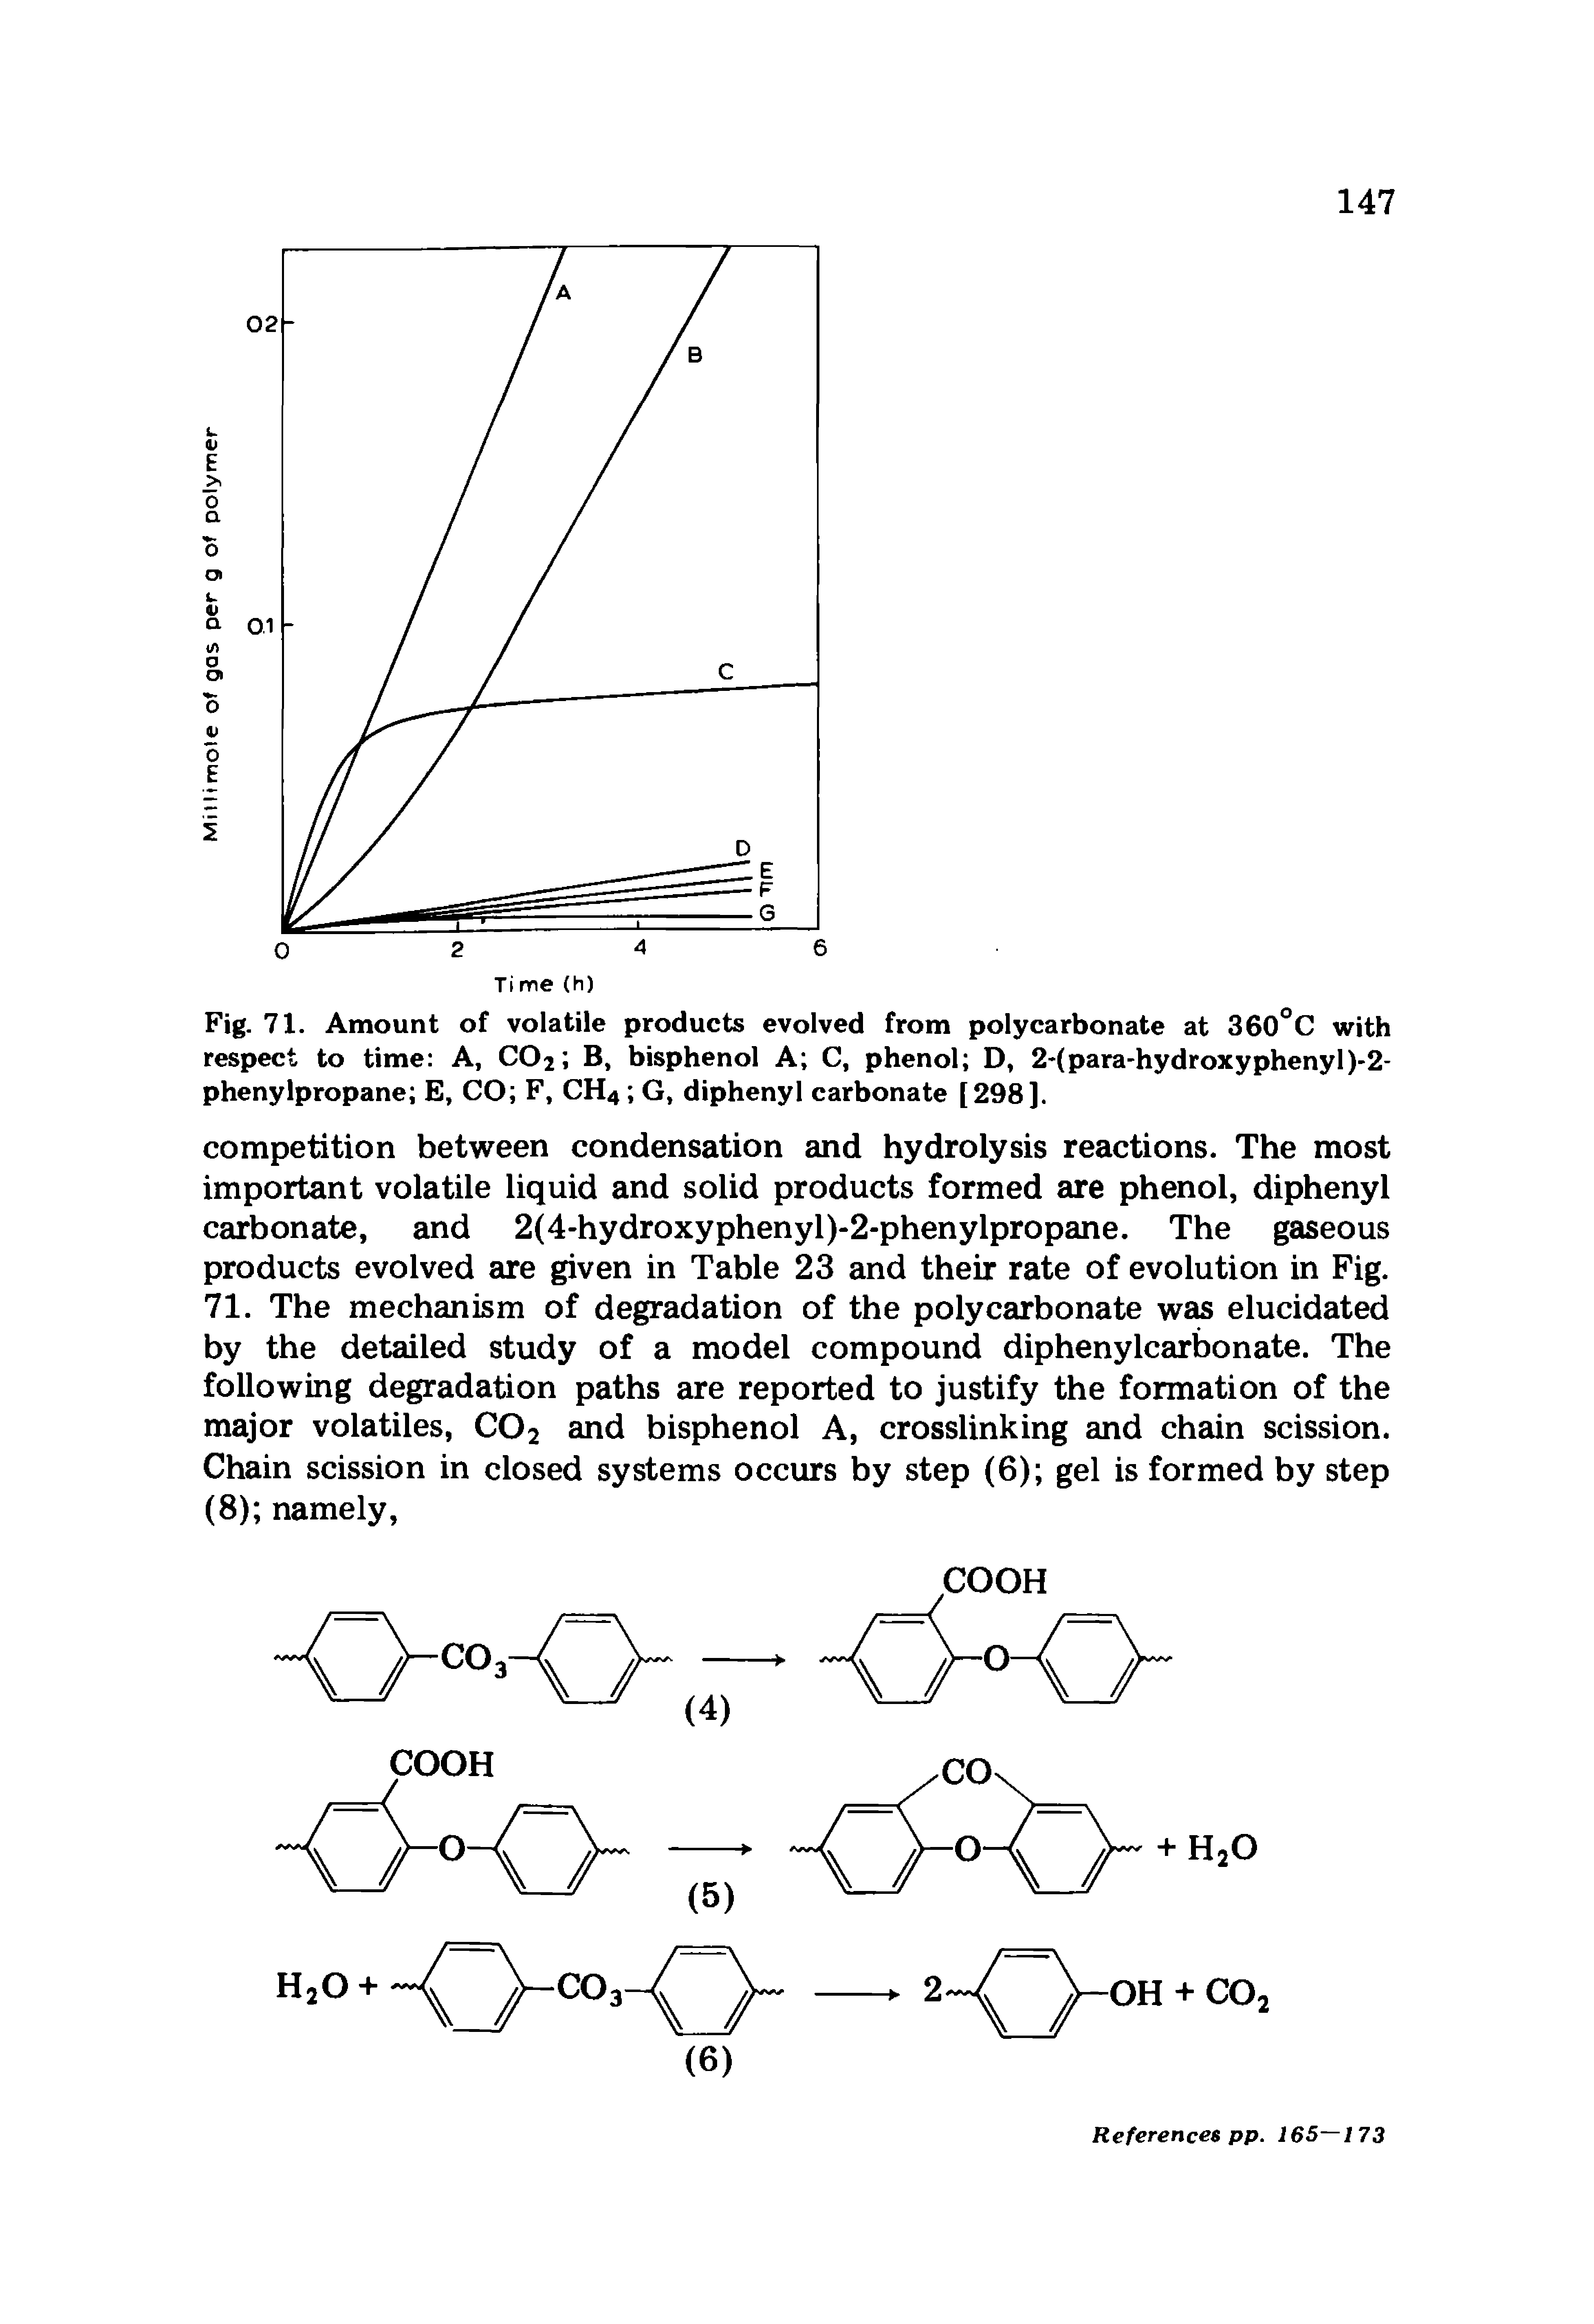 Fig. 71. Amount of volatile products evolved from polycarbonate at 360°C with respect to time A, C02 B, bisphenol A C, phenol D, 2-( para-hydroxy phenyl )-2-phenylpropane E, CO F, CH4 G, diphenyl carbonate [298].